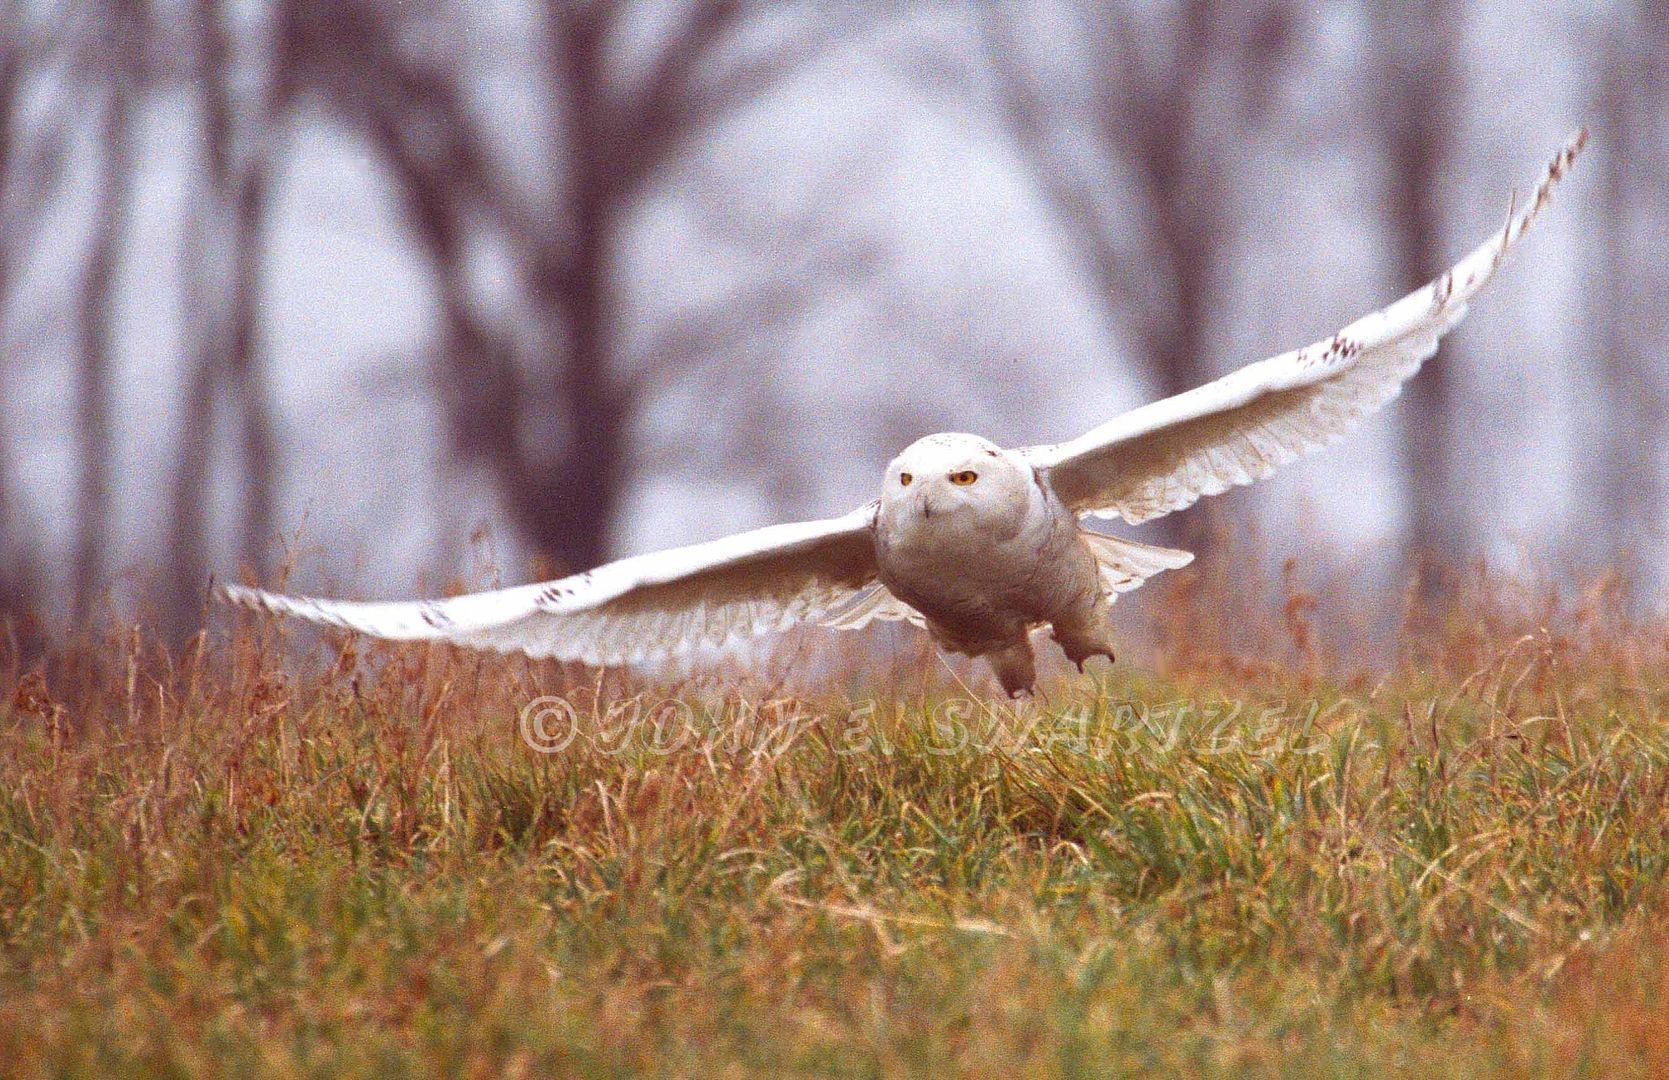 LOW FLYING SNOWY OWL Pictures, Images and Photos